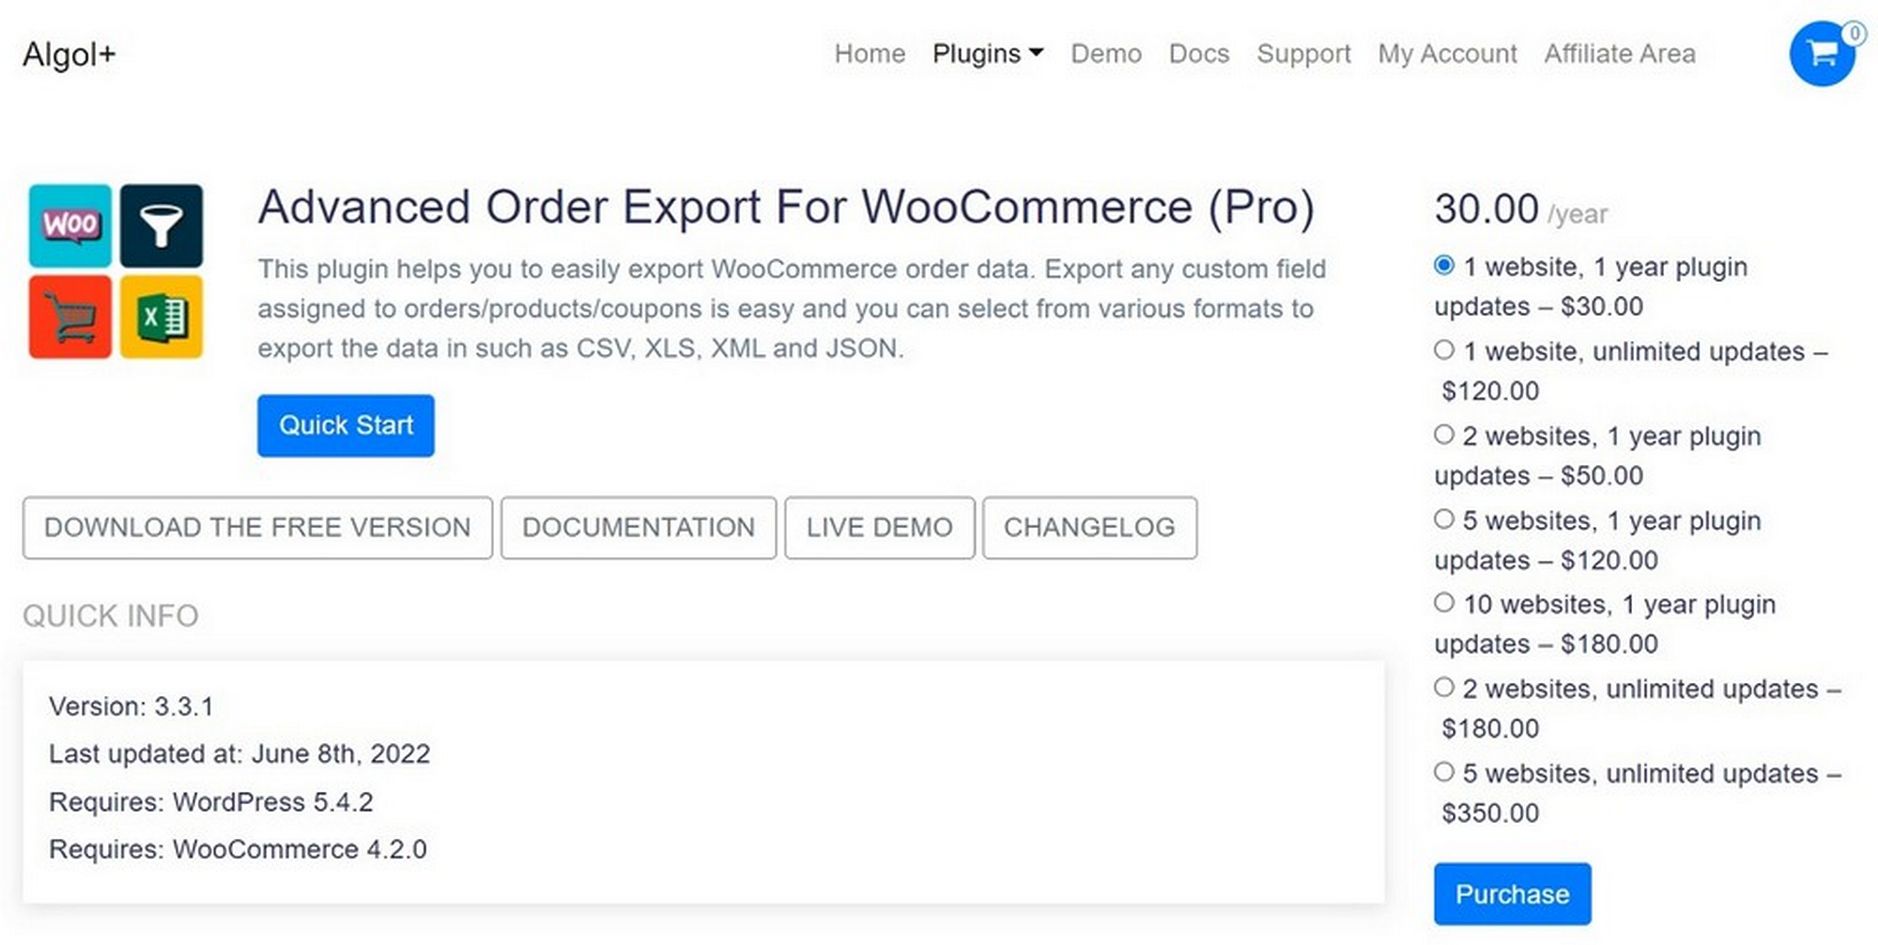 advanced order export for WooCommerce from AlgolPlus